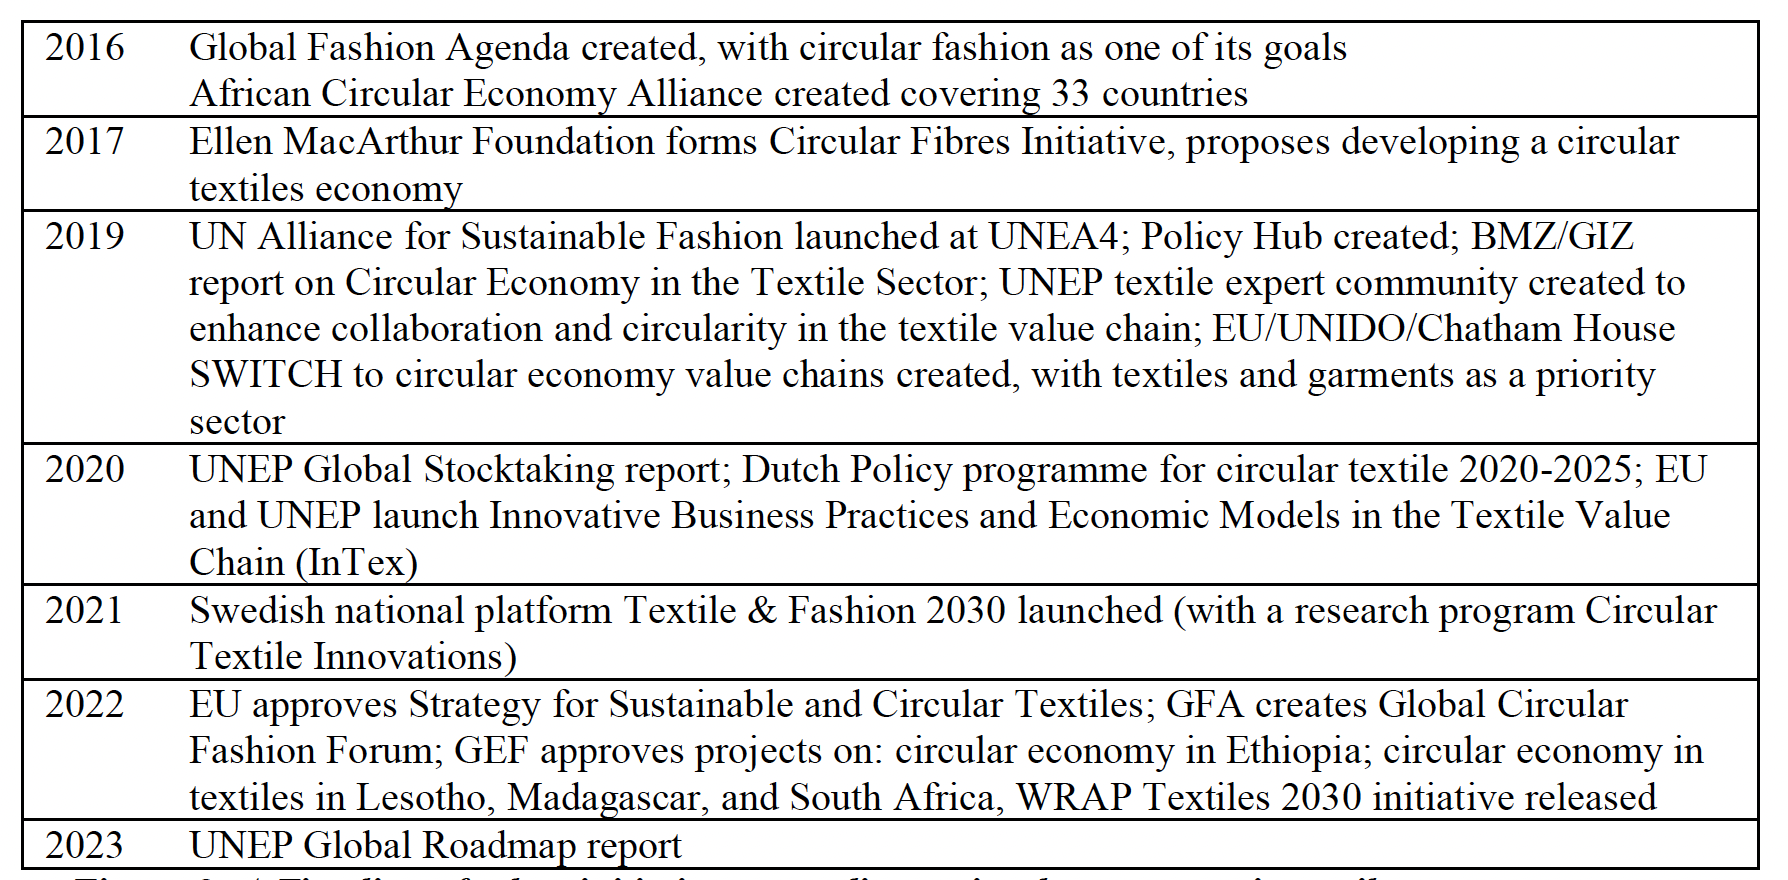 Figure 8: A Timeline of select initiatives regarding a circular economy in textiles